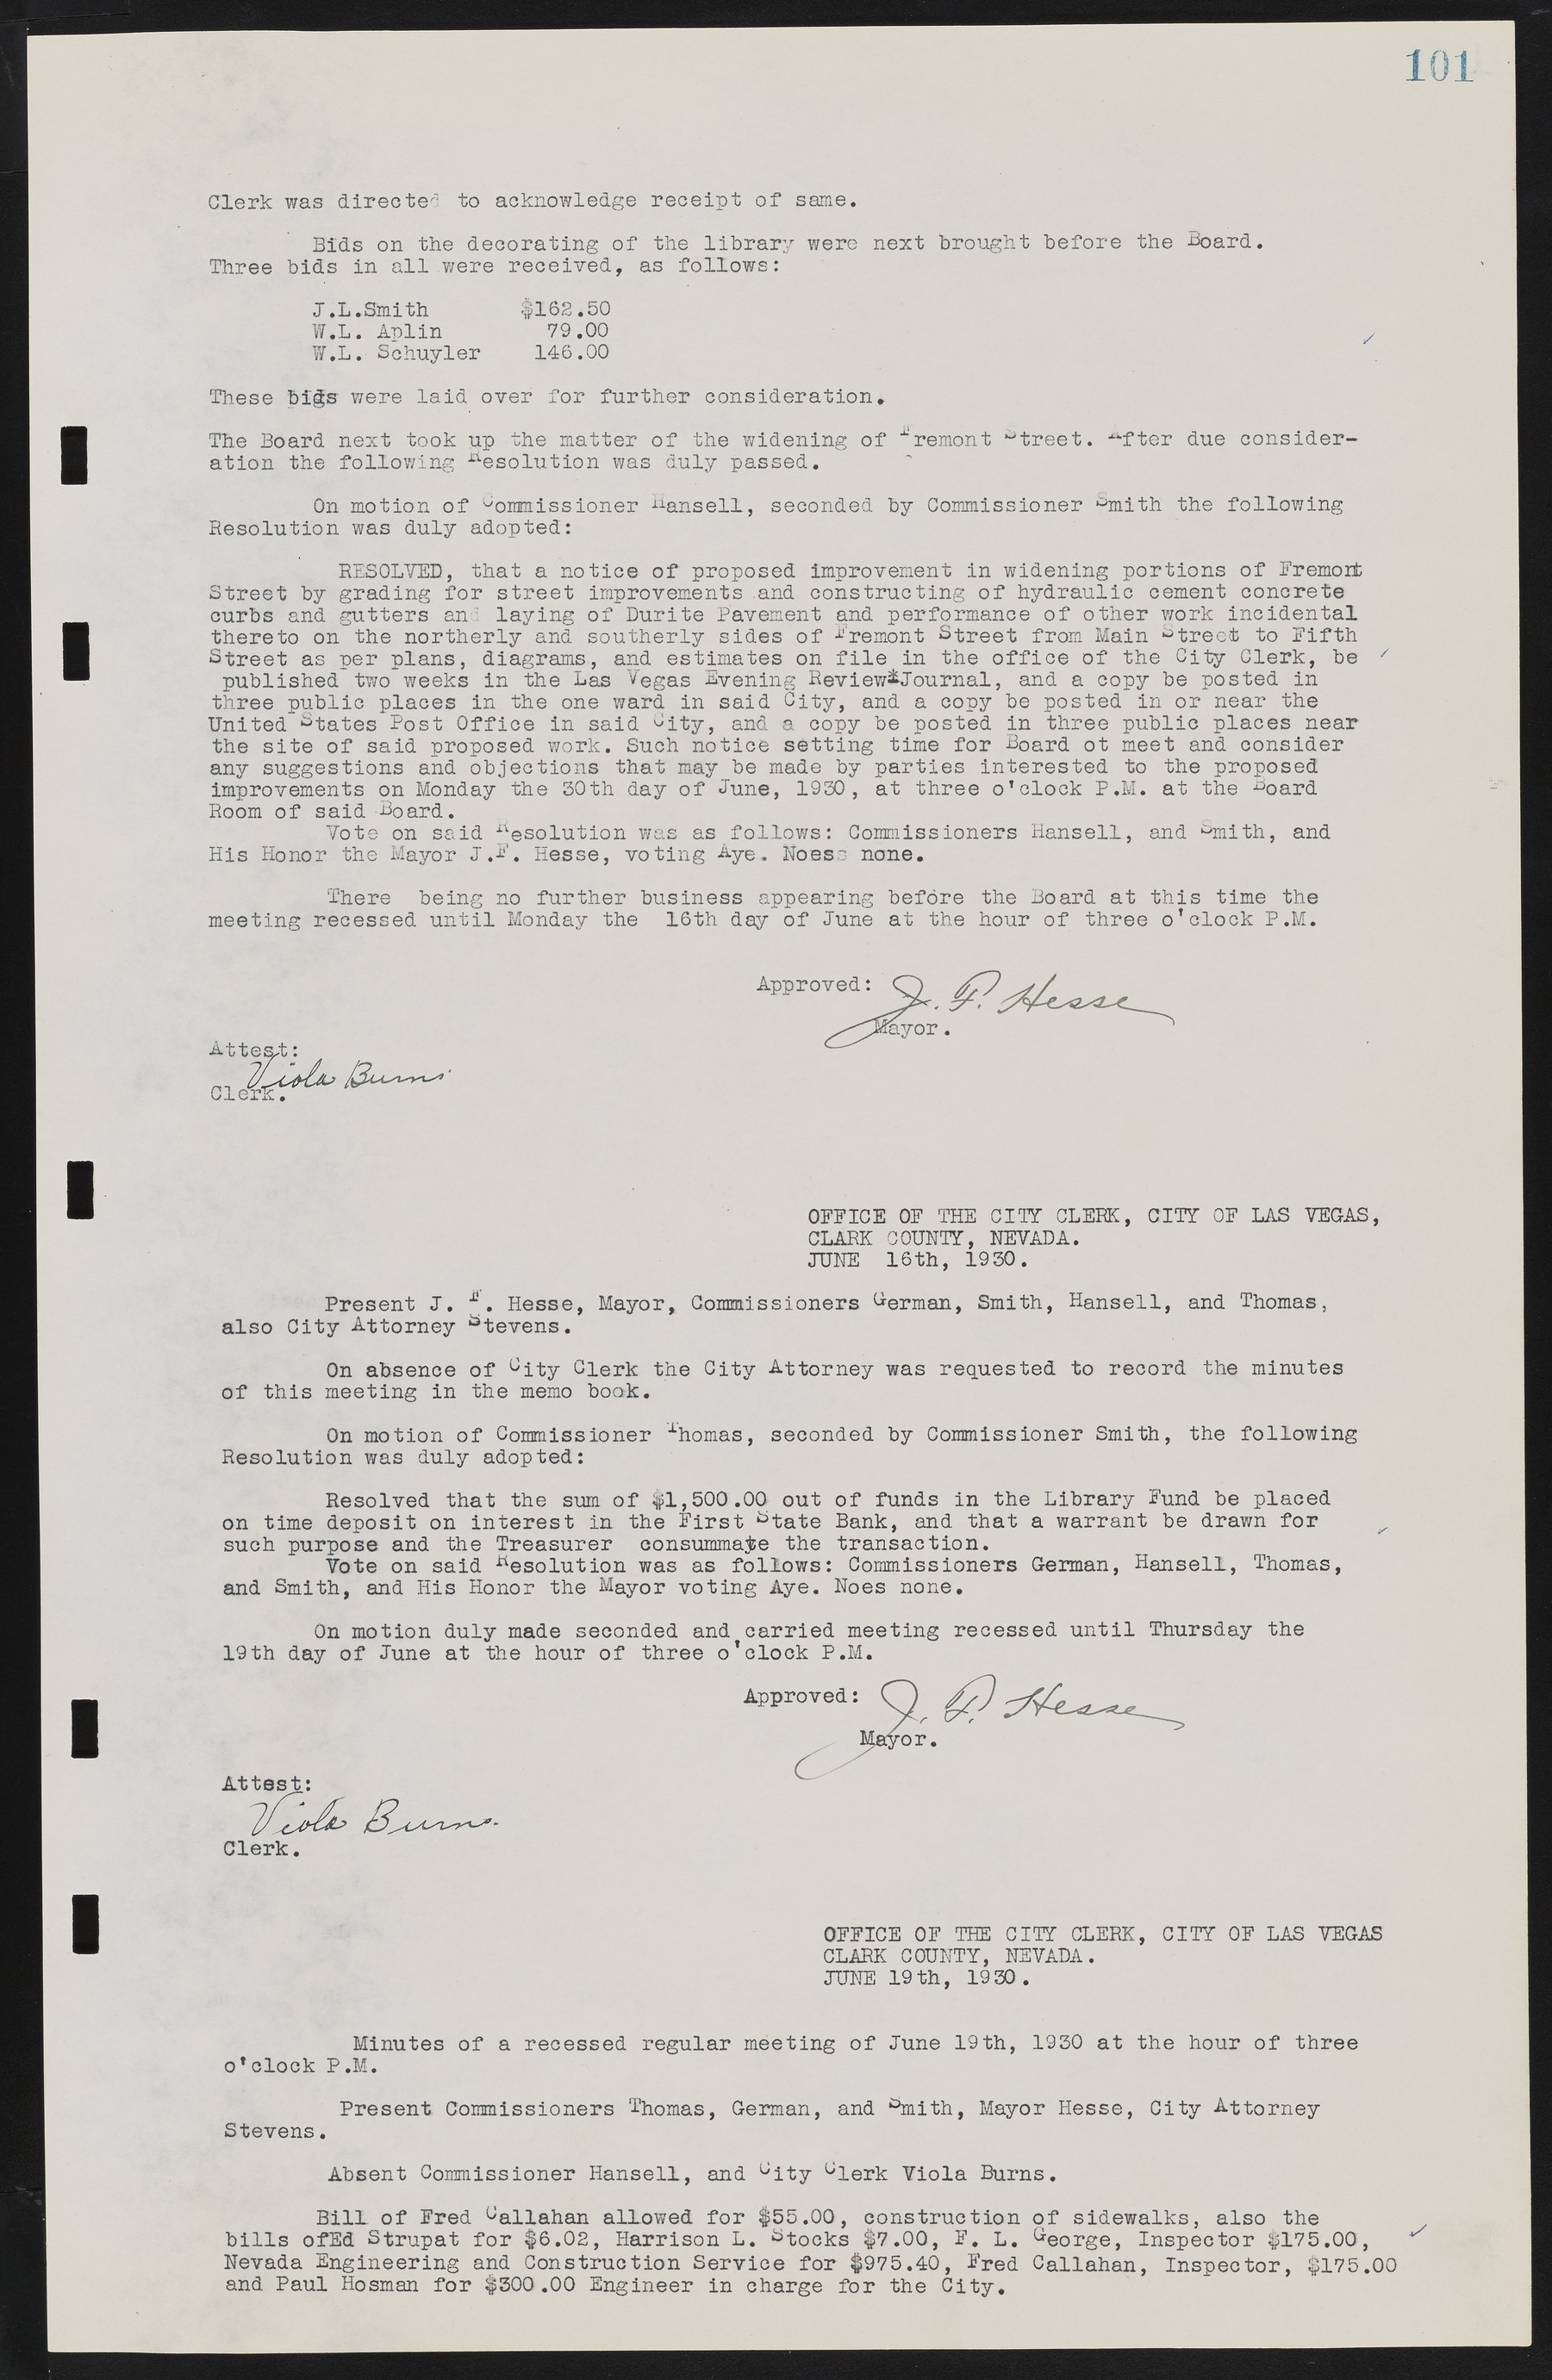 Las Vegas City Commission Minutes, May 14, 1929 to February 11, 1937, lvc000003-107